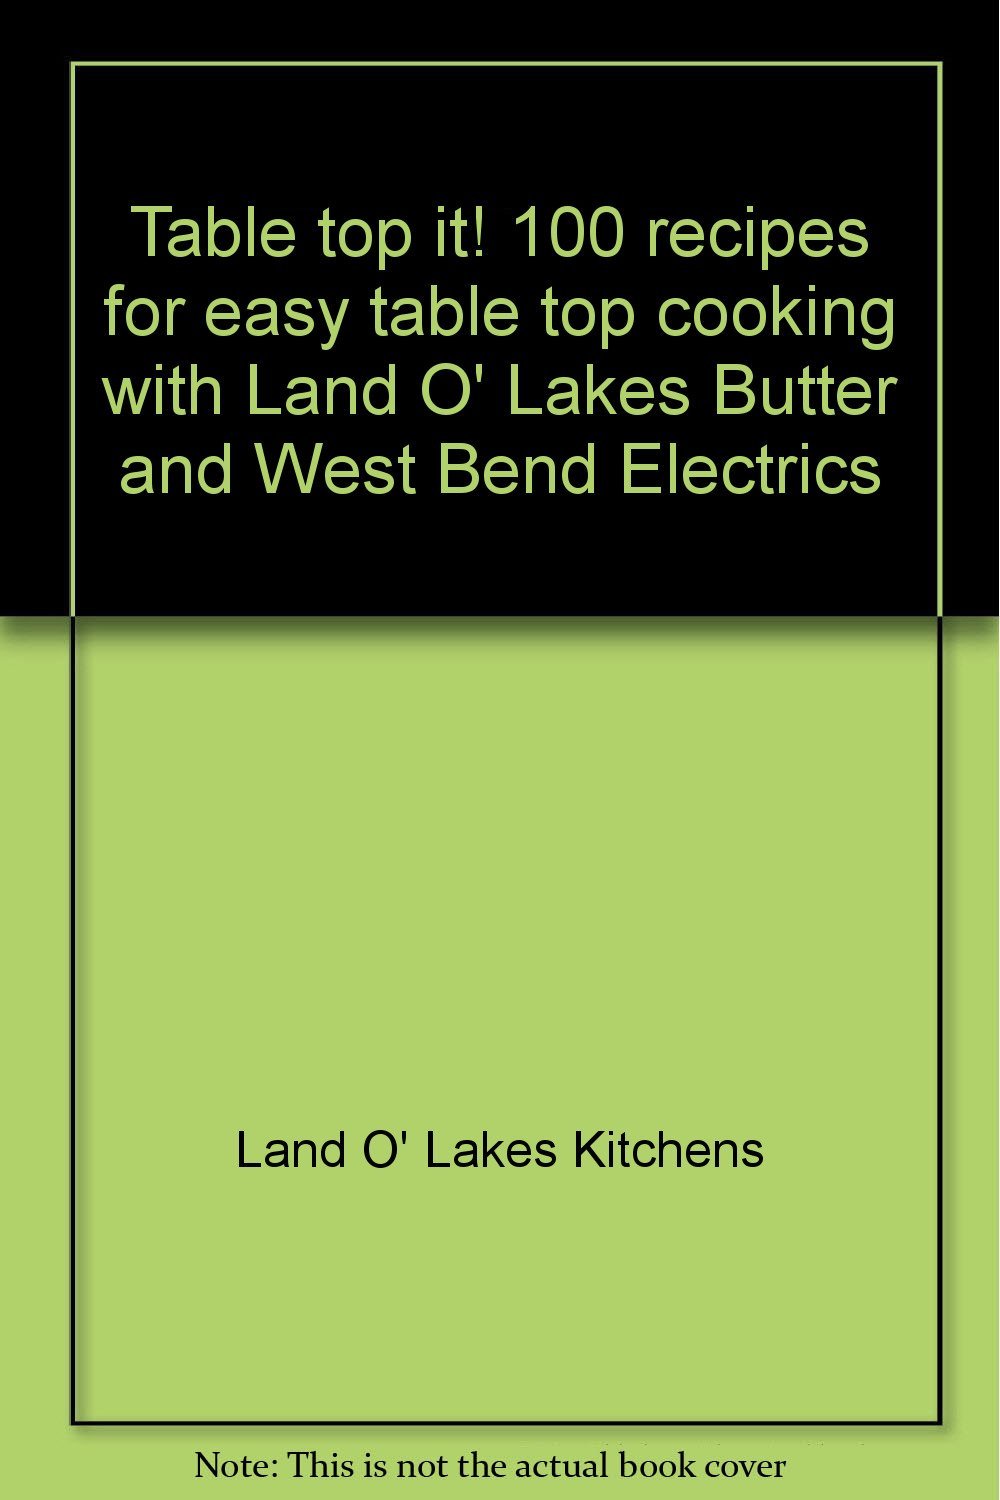 Table top it! 100 recipes for easy table top cooking with Land O' Lakes Butter a - $9.79